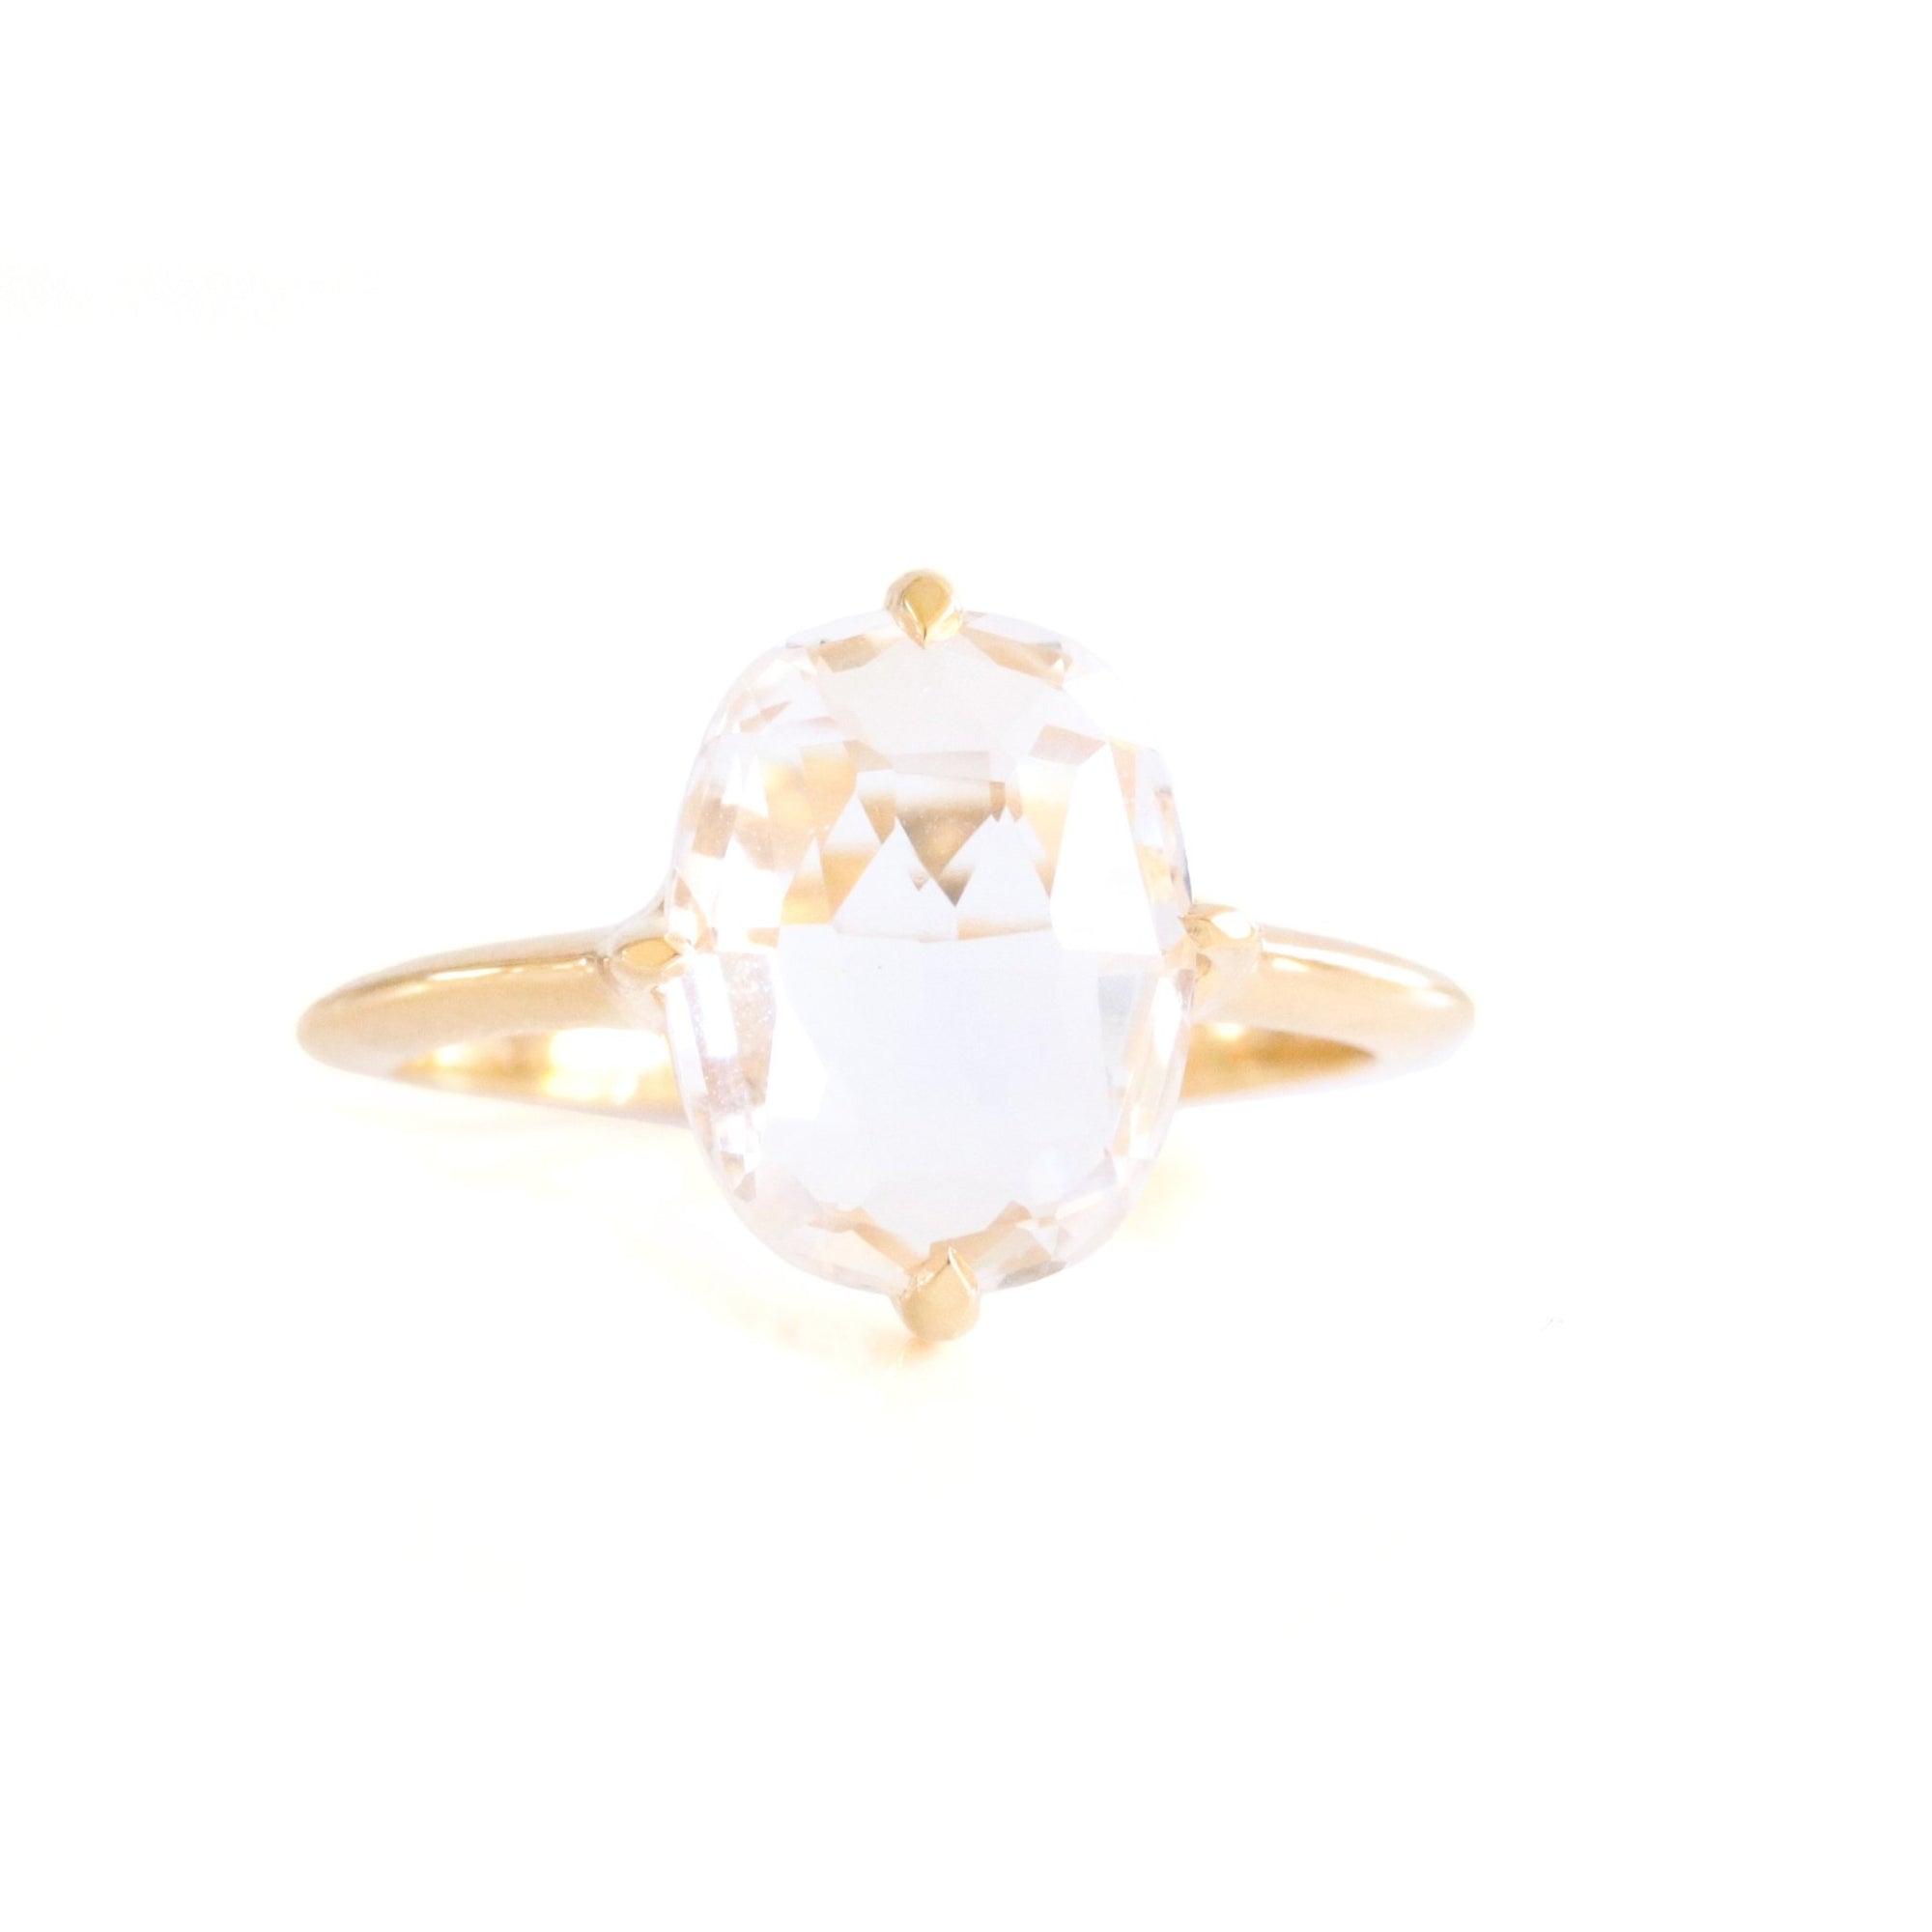 KIND OVAL SOLITAIRE RING - WHITE TOPAZ & GOLD - SO PRETTY CARA COTTER